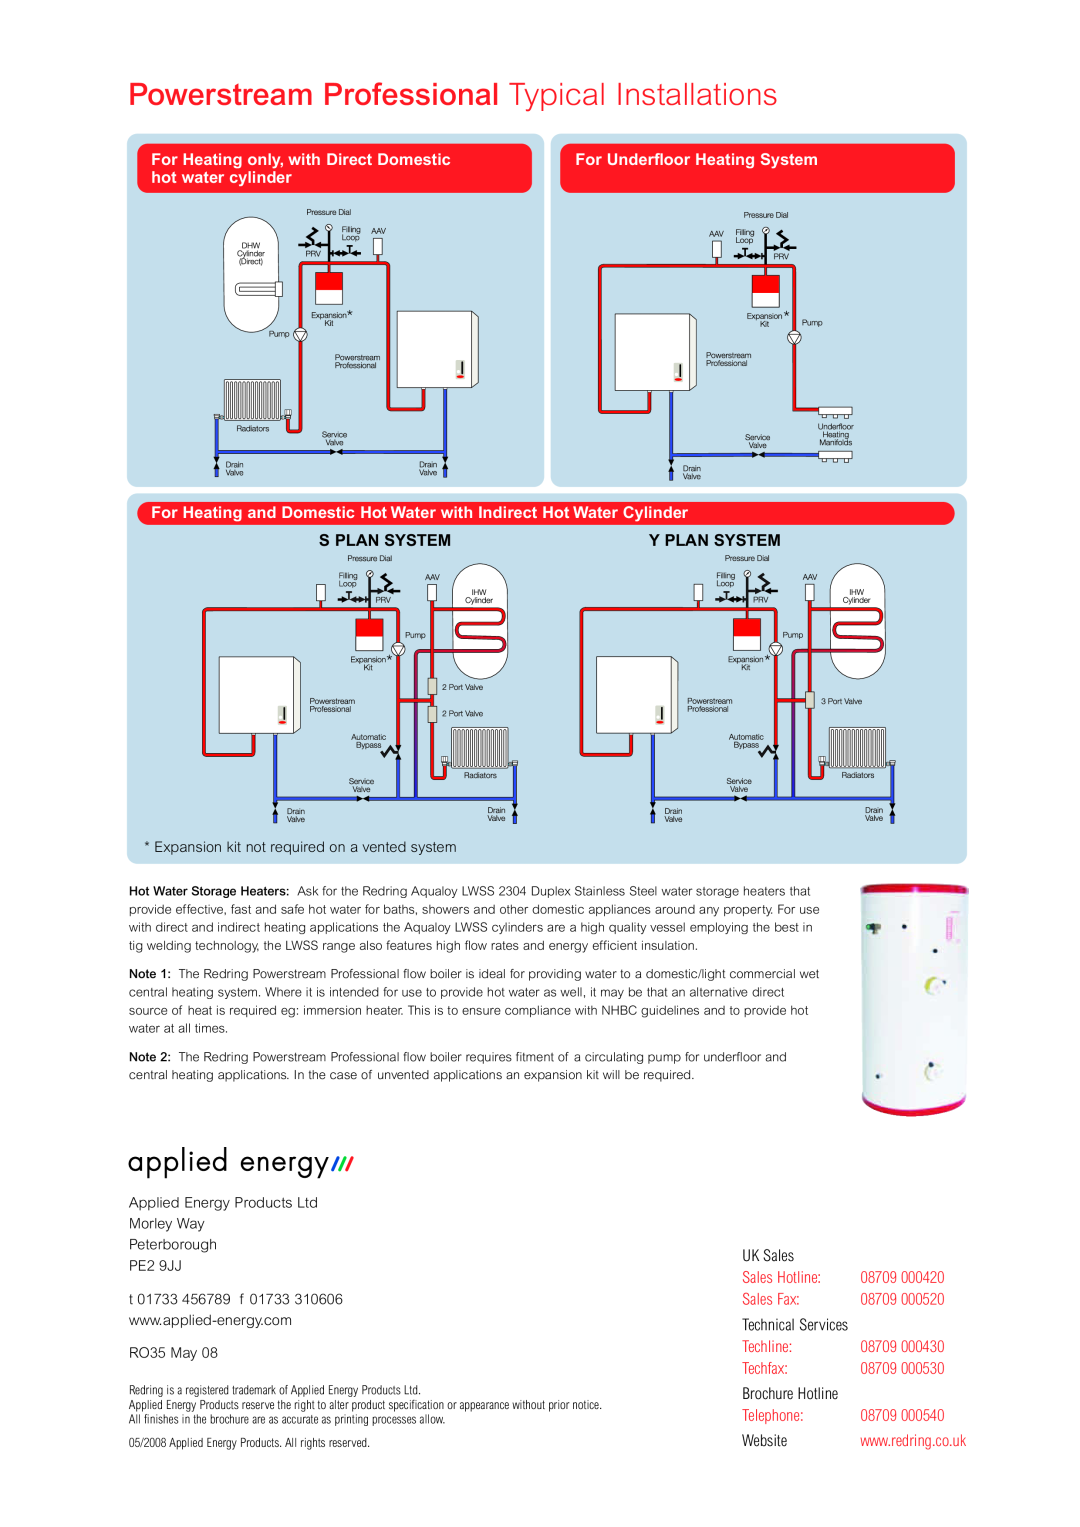 Signat manual Powerstream Professional Typical Installations, For Heating only, with Direct Domestic, hot water cylinder 